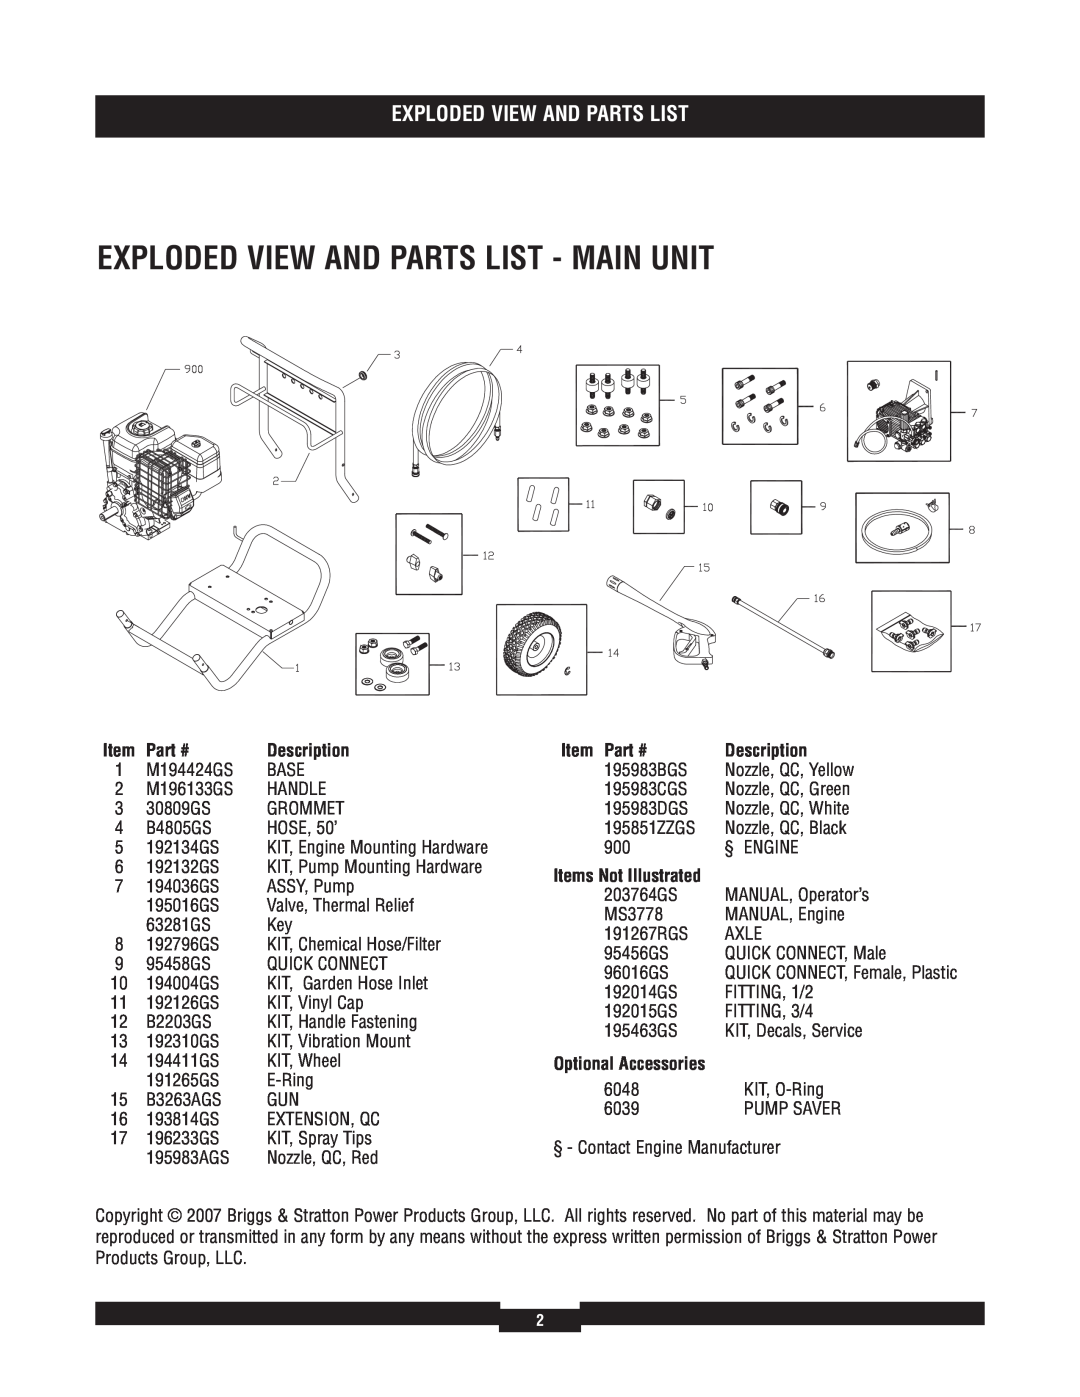 Briggs & Stratton 020225-0 manual Exploded View And Parts List - Main Unit, Description, Items Not Illustrated 